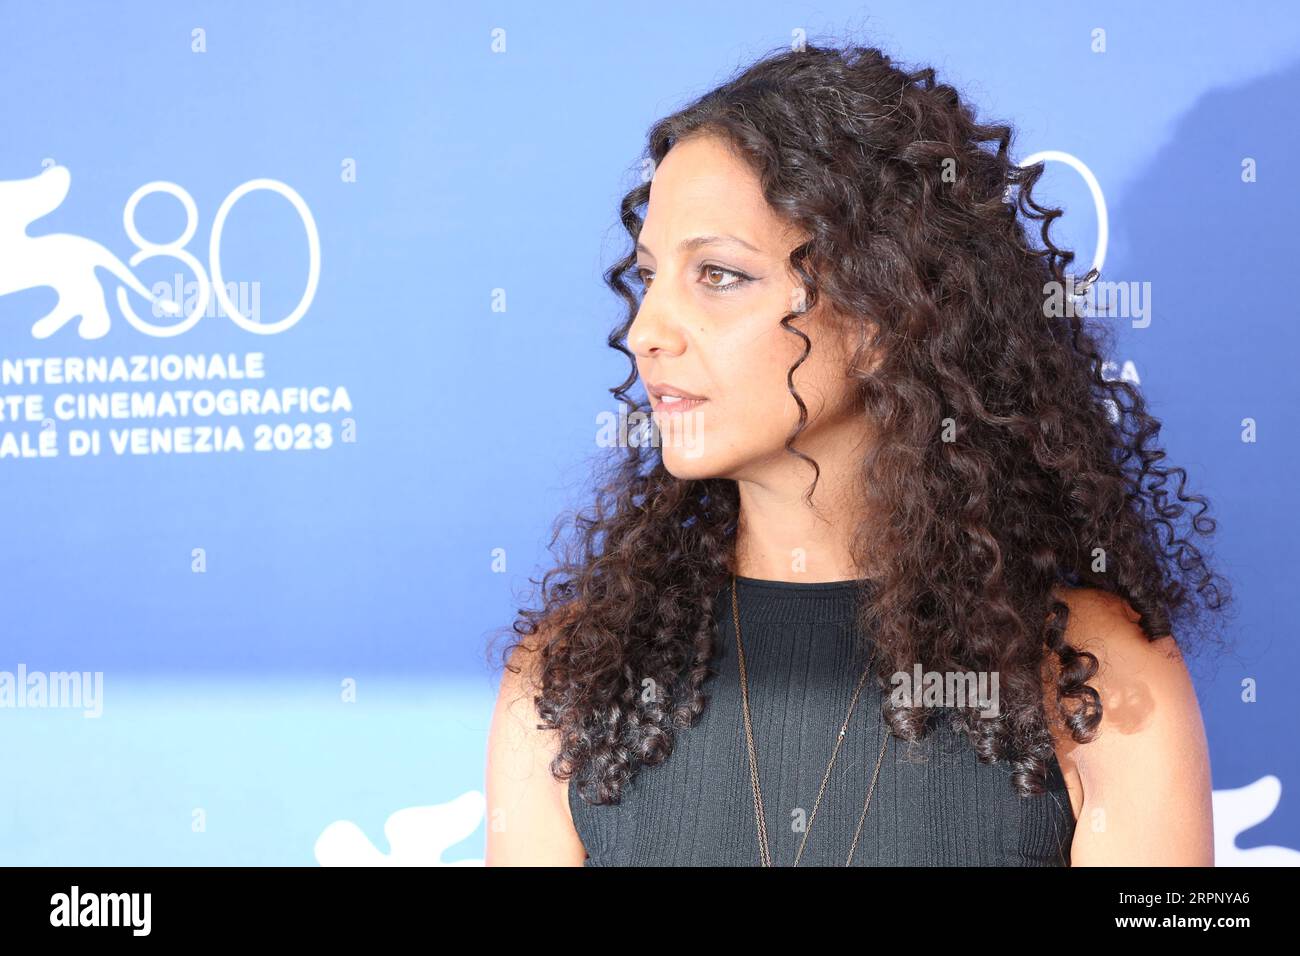 Venice, Italy, 5th September, 2023. Dalia Naous at the photo call for the film Green Border (Zielona Granica) at the 80th Venice International Film Festival. Photo Credit: Doreen Kennedy / Alamy Live News. Stock Photo